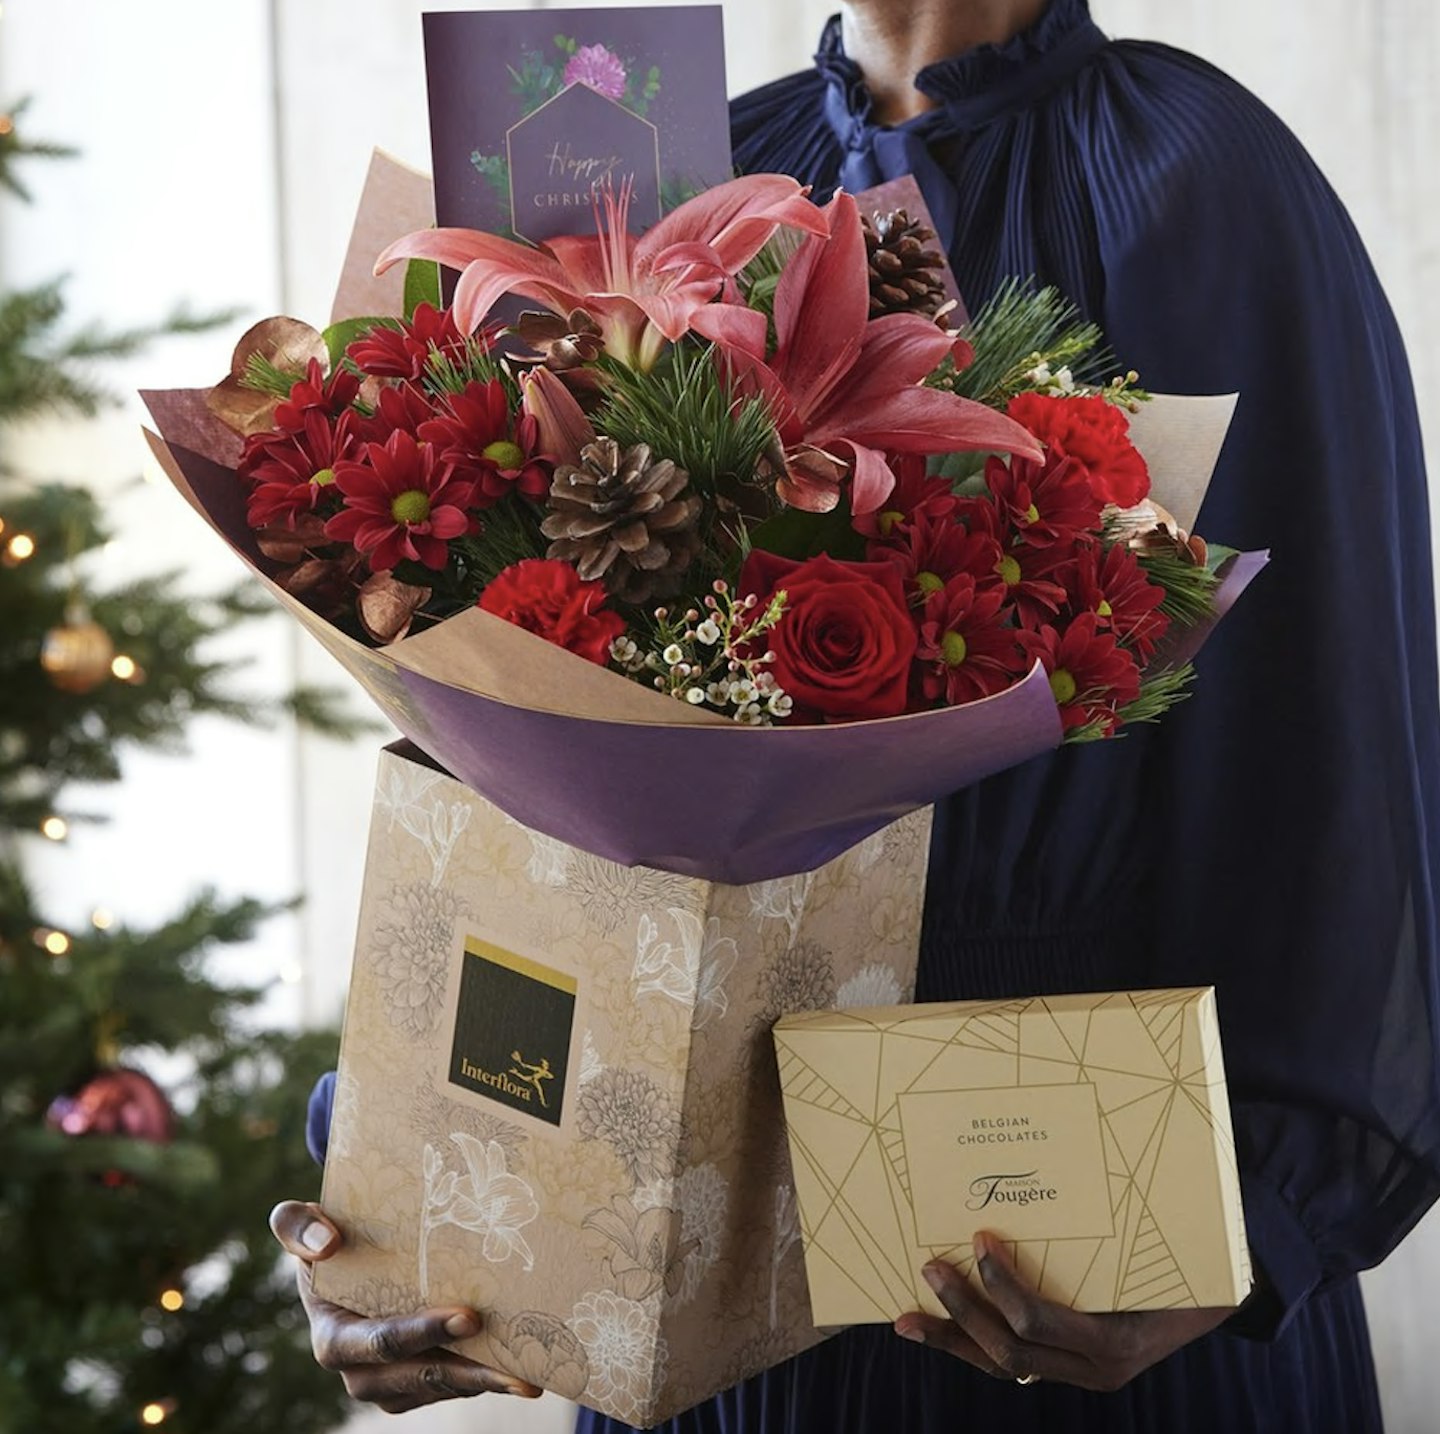 Interflora, Bespoke Christmas Bouquet With Card And Chocolates